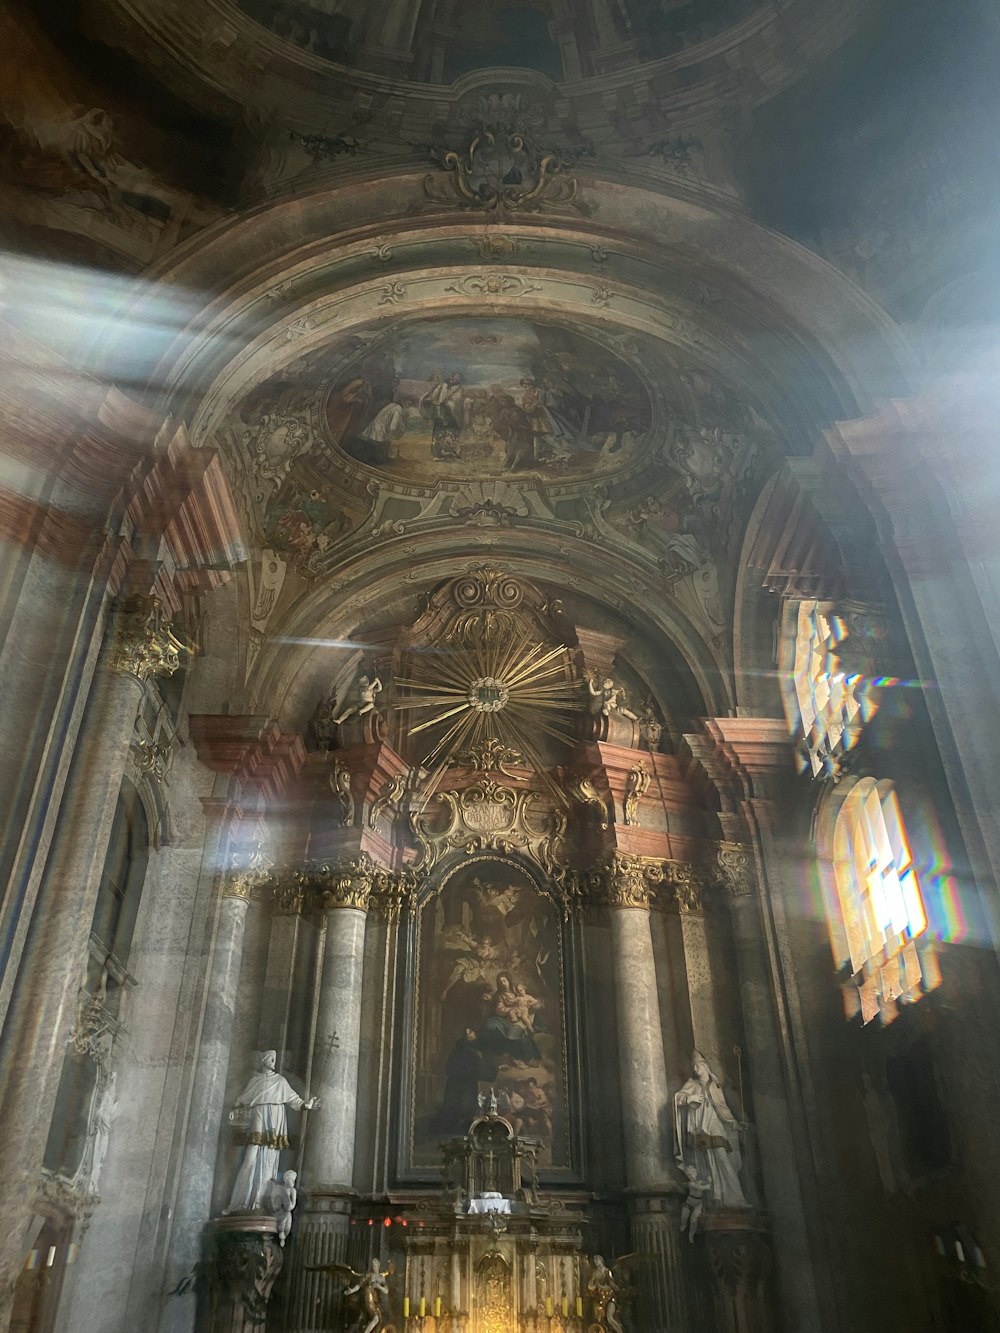 the sunlight is shining through the windows of a church